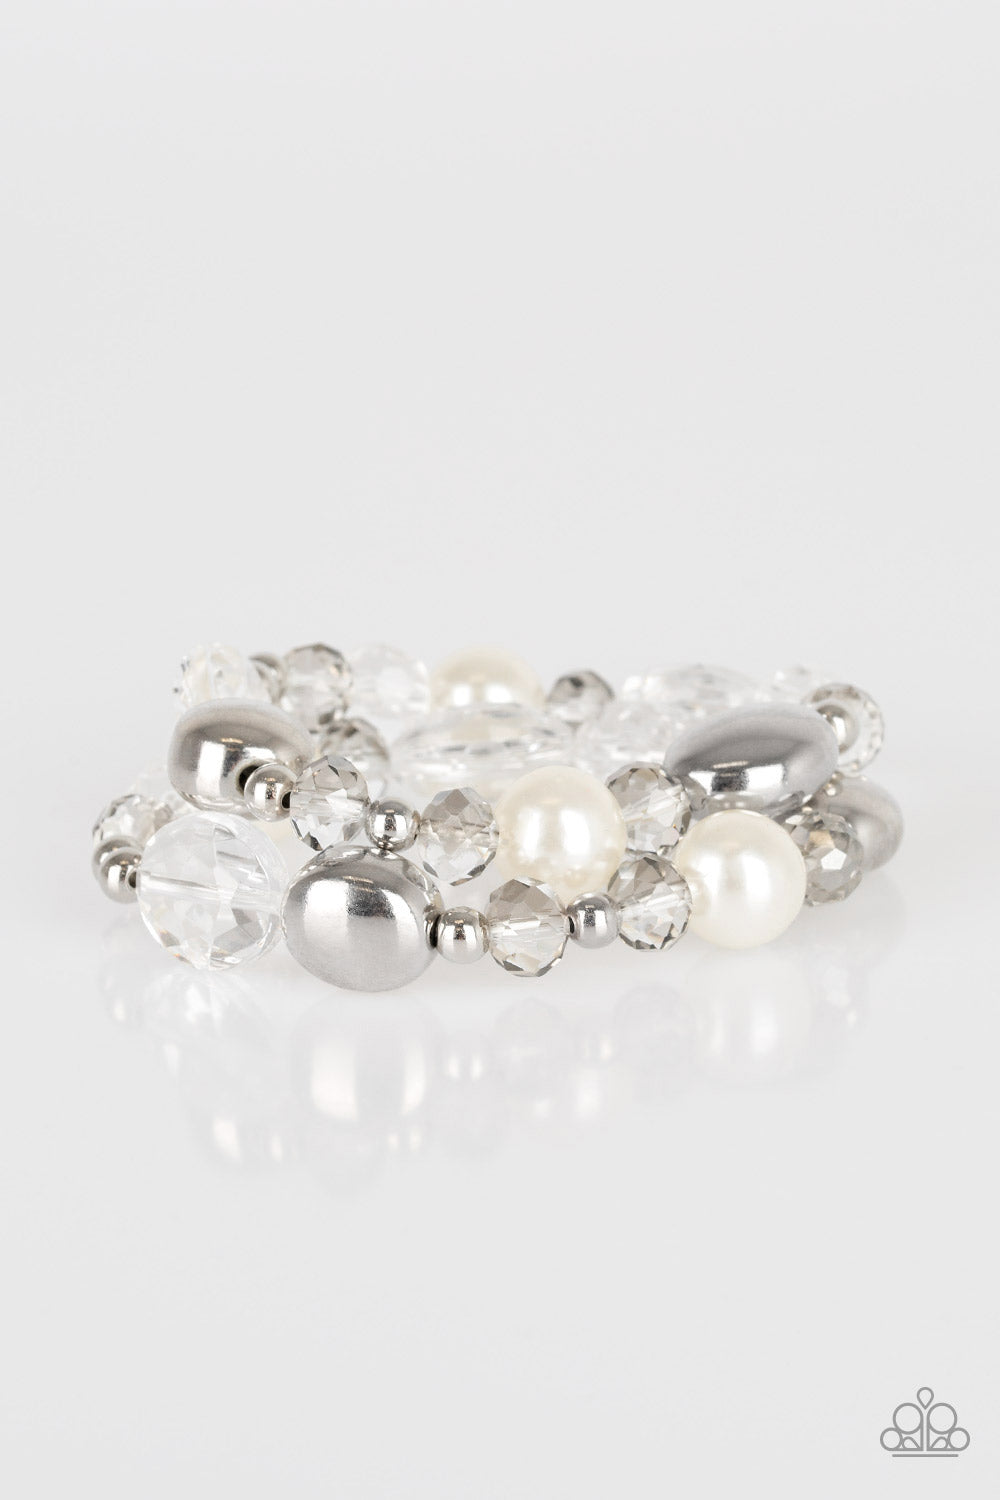 DOWNTOWN DAZZLE - WHITE PEARLS CRYSTALS STRETCH BRACELET SET